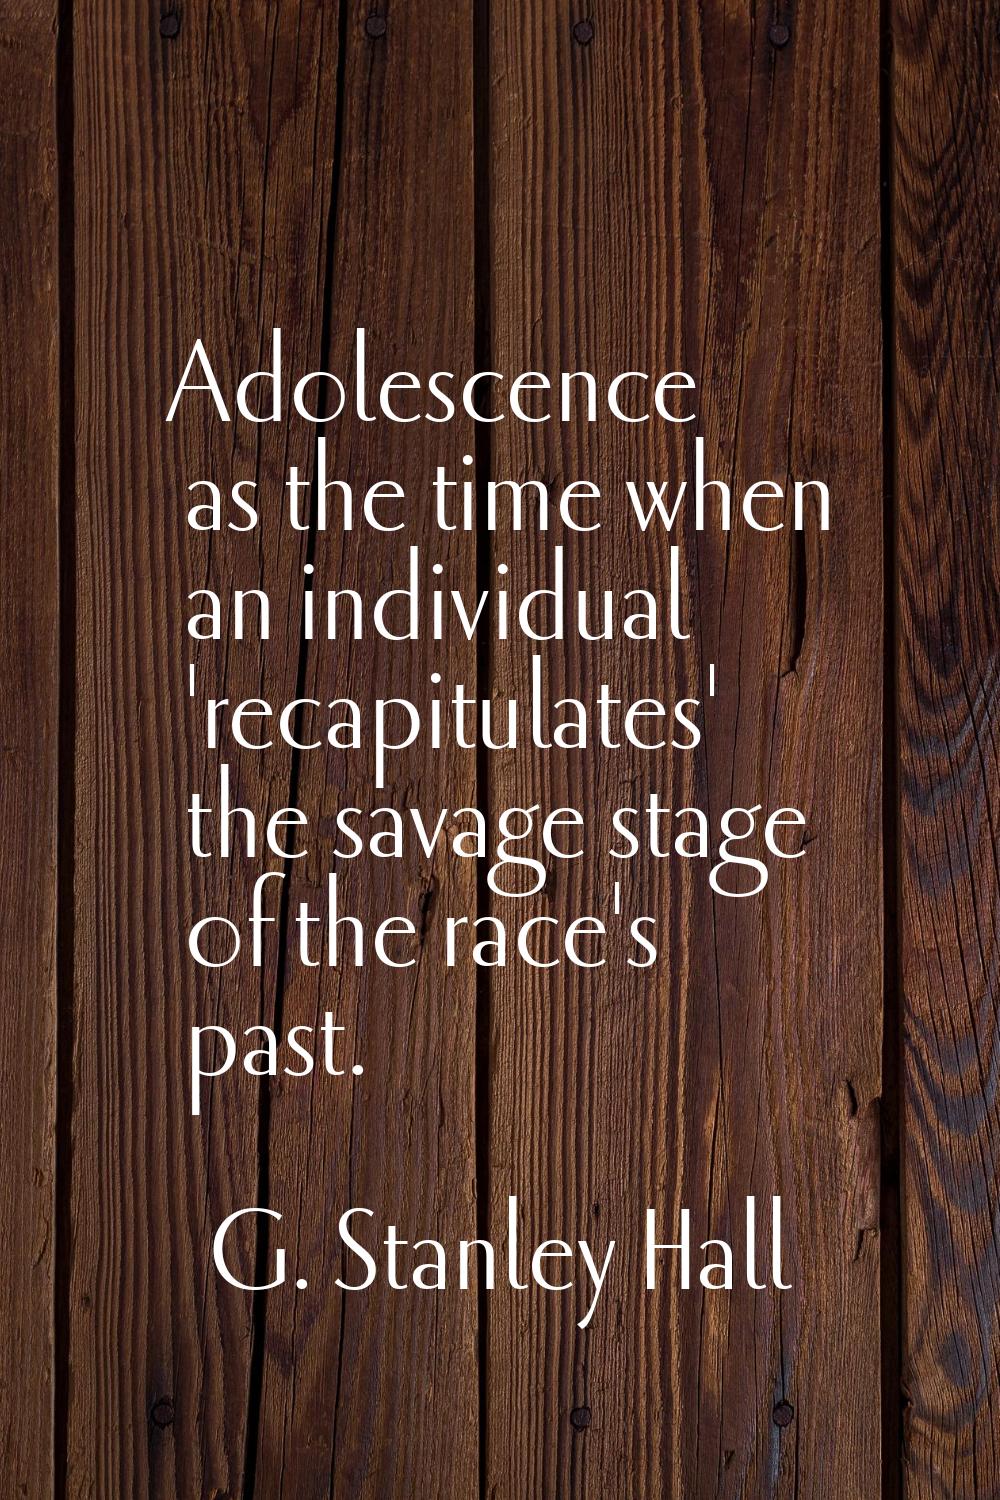 Adolescence as the time when an individual 'recapitulates' the savage stage of the race's past.